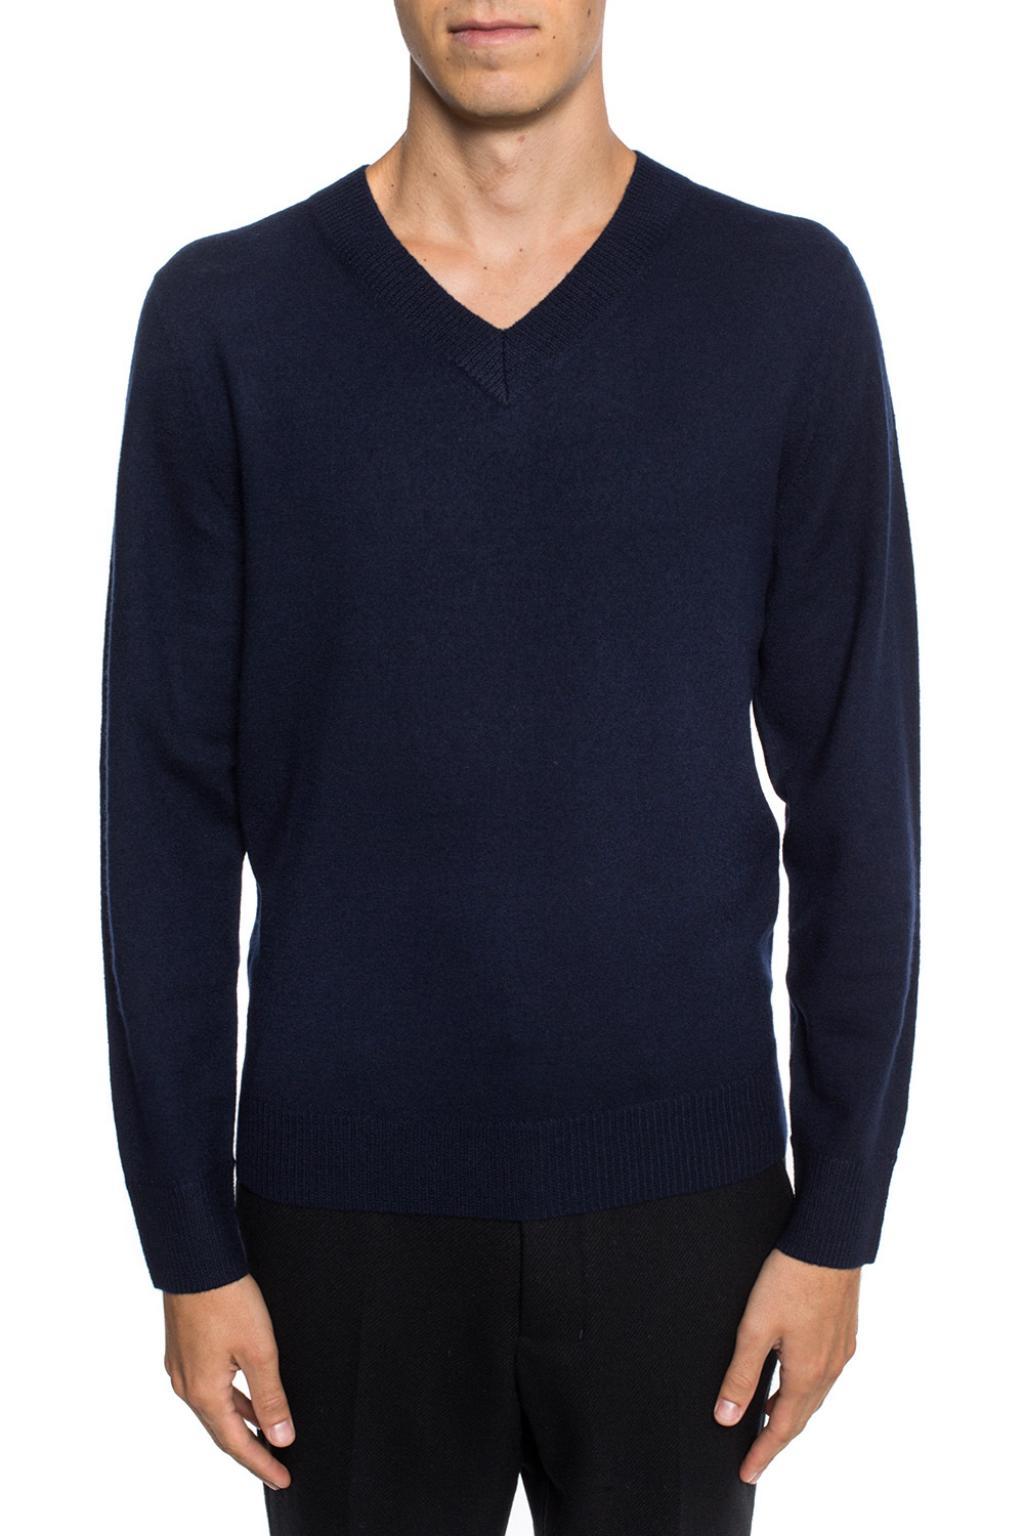 A.P.C. V-neck Sweater in Blue for Men - Lyst